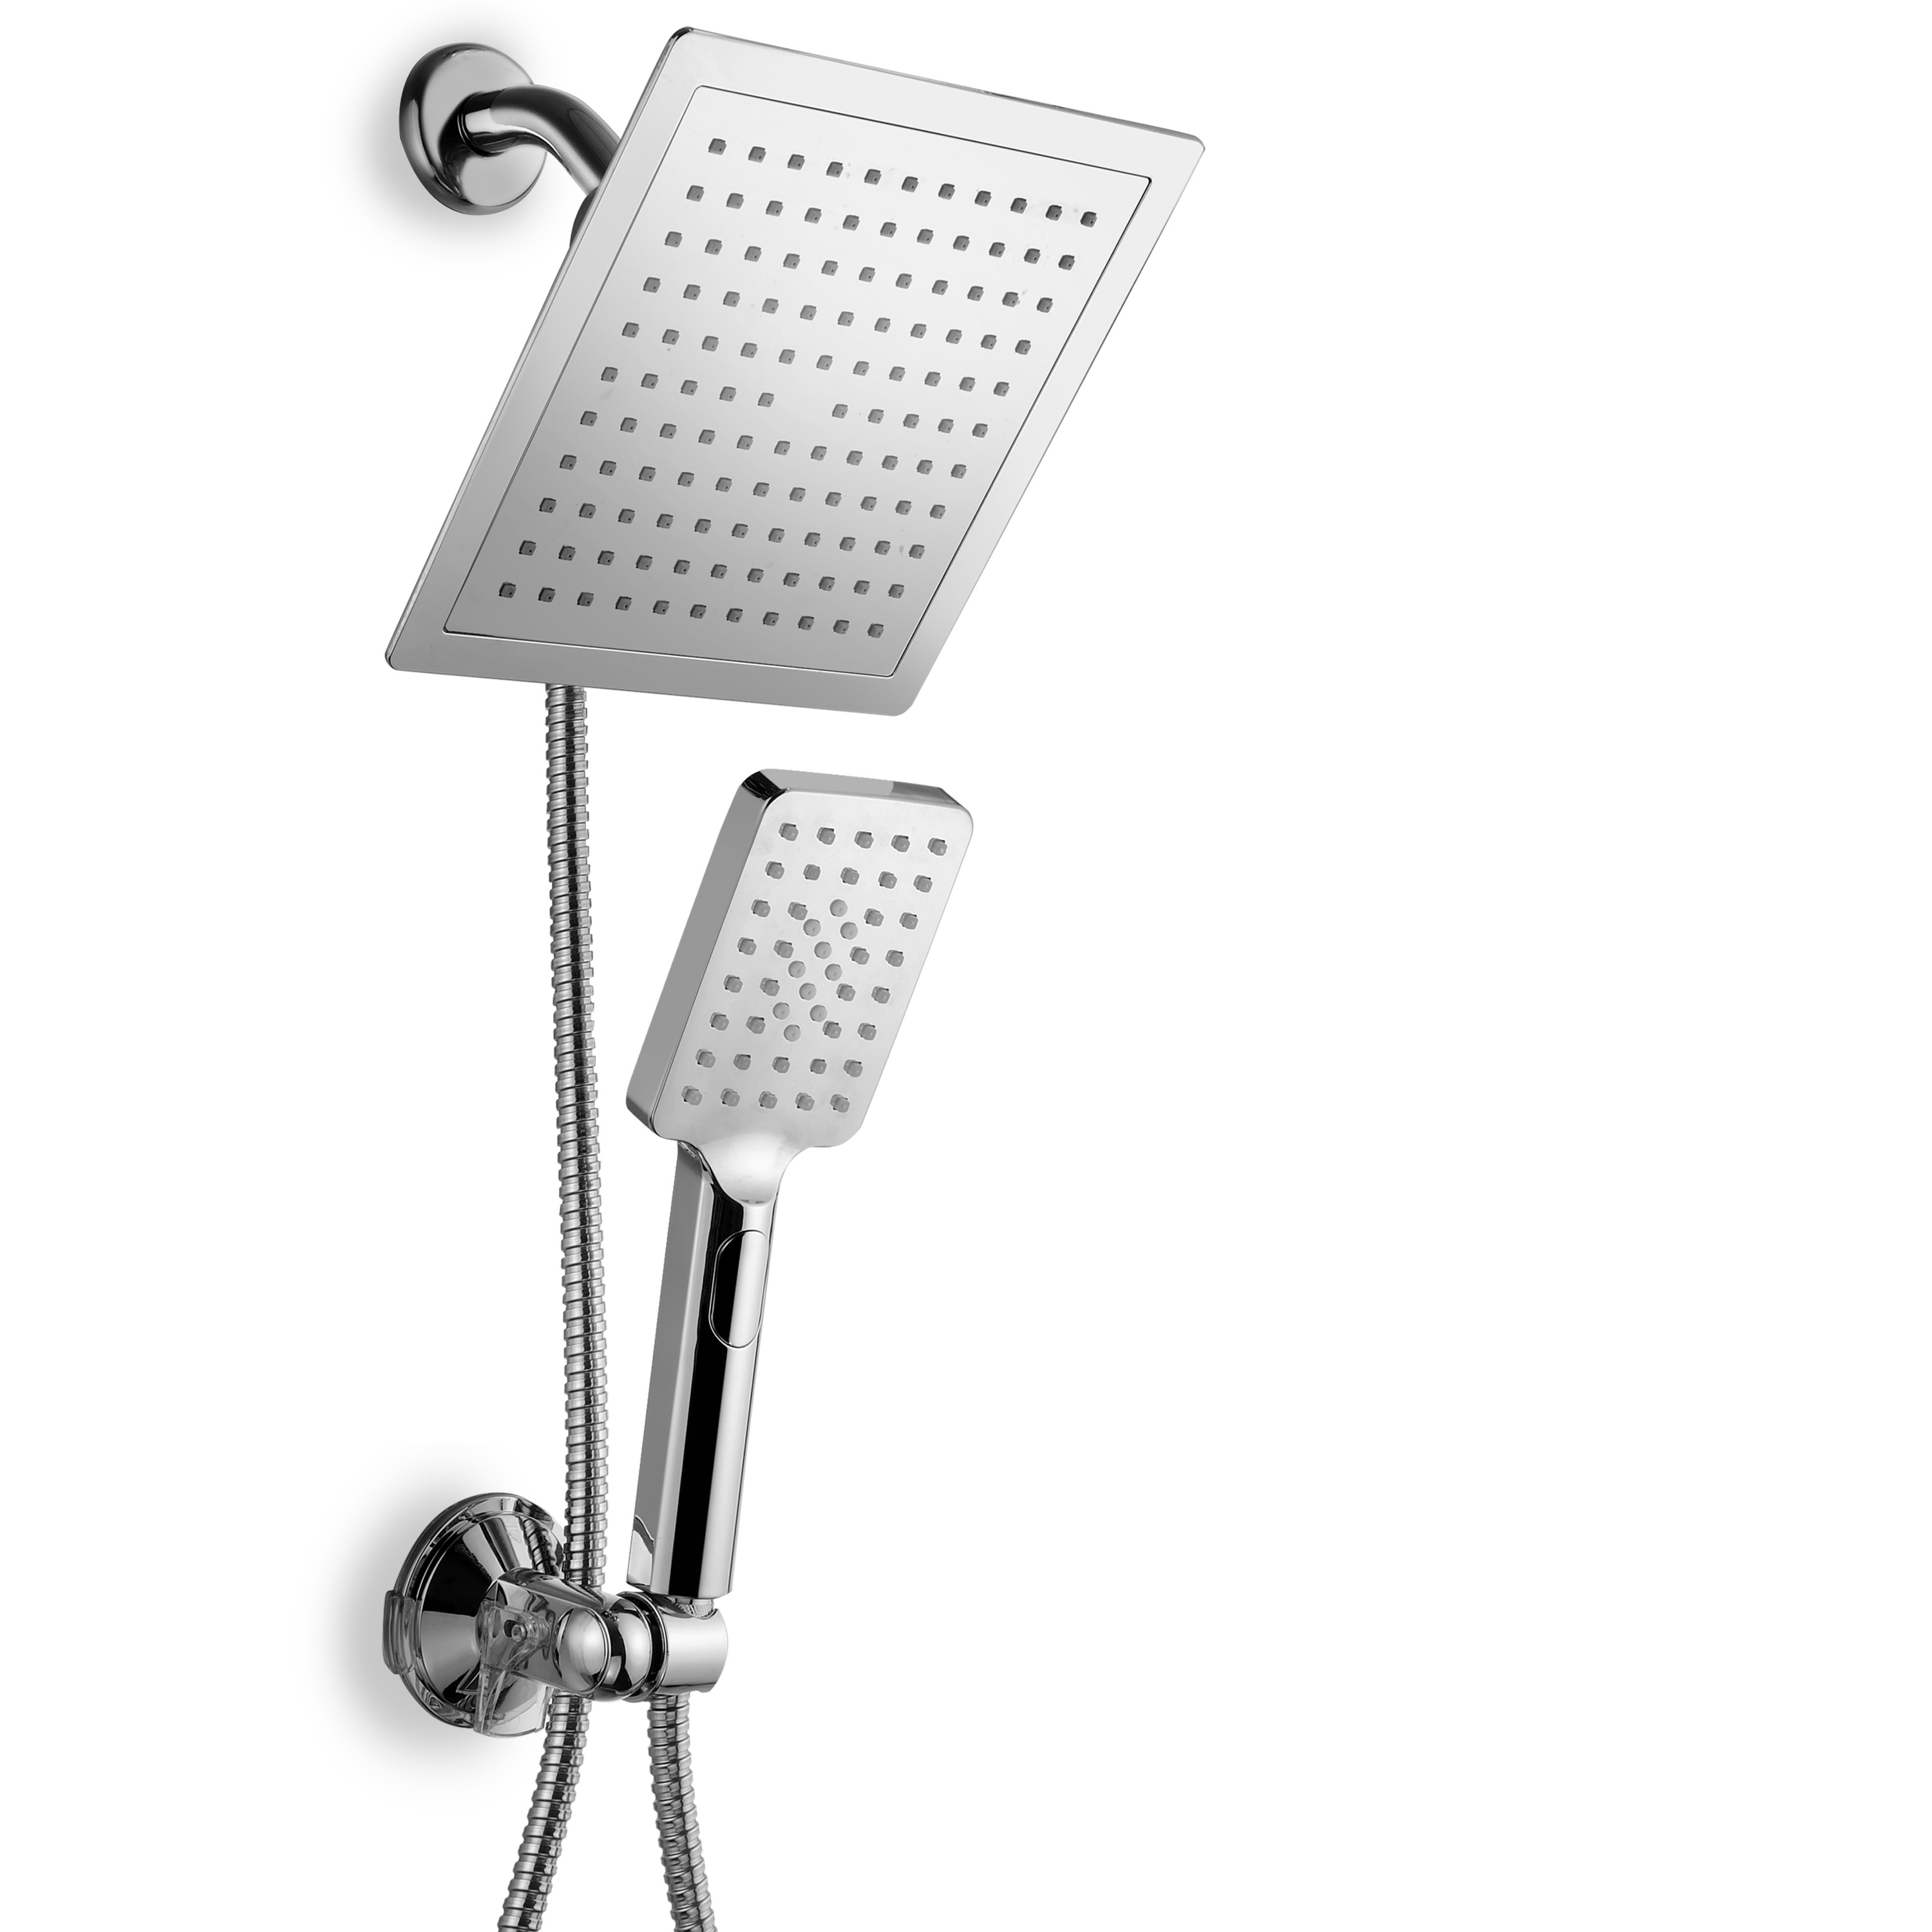 DreamSpa Ultra-Luxury 9-Inch Square Rainfall Combo with Push-Control Handheld Shower and Low-Reach Wall Bracket, Chrome - image 1 of 7